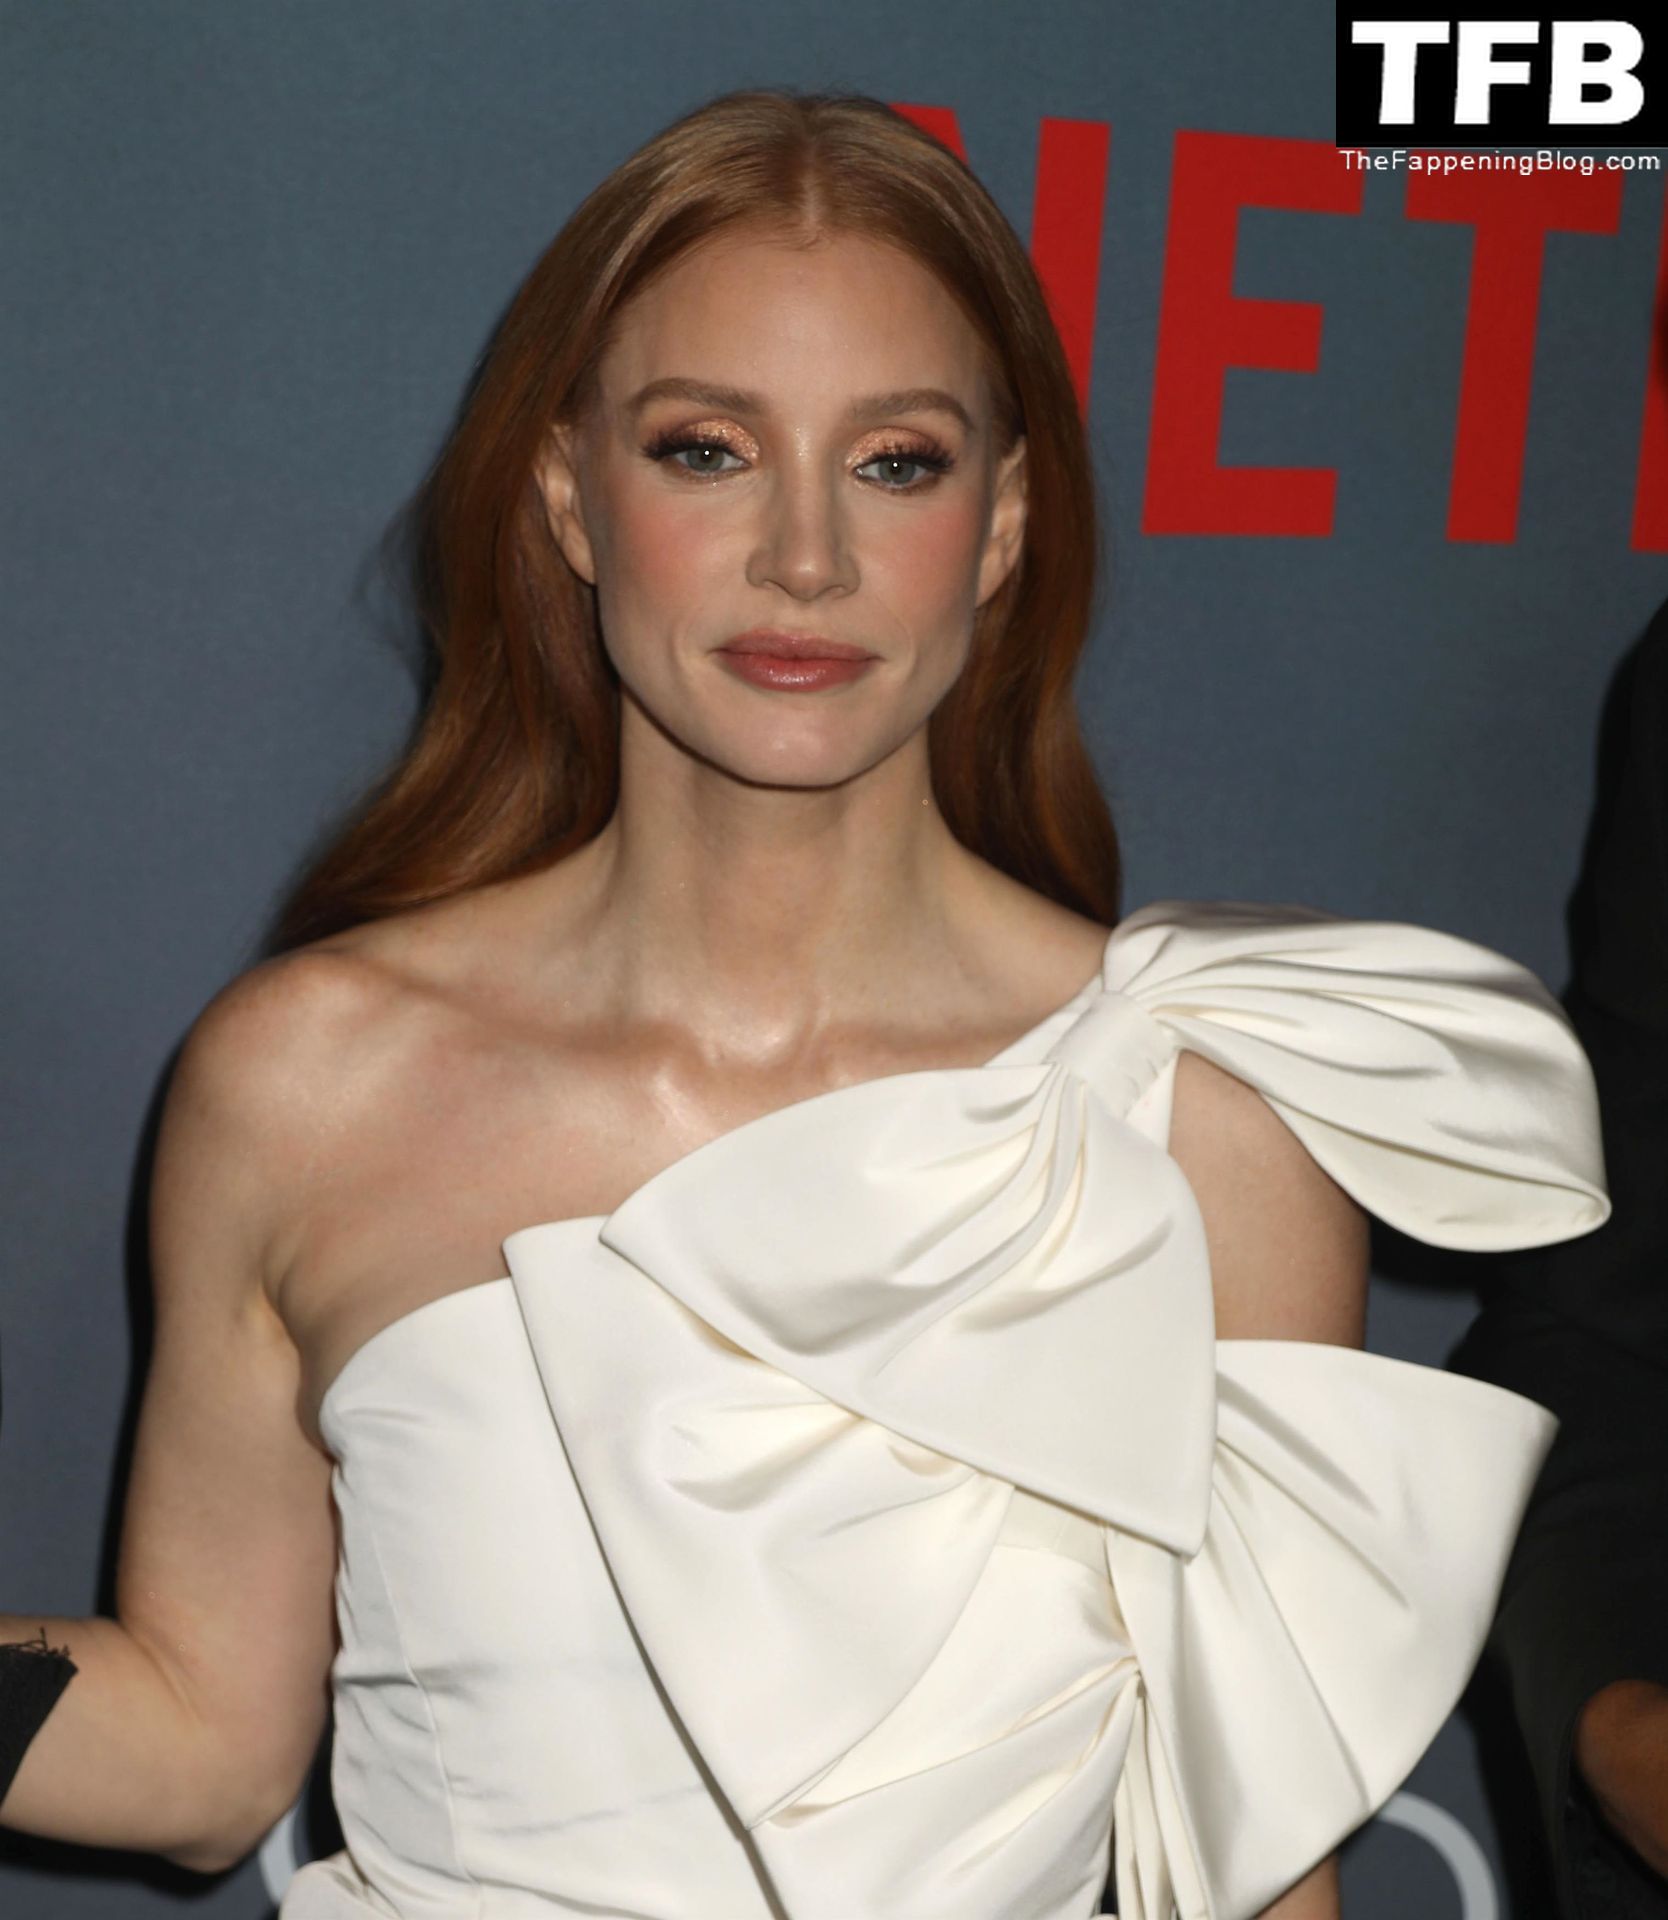 Jessica Chastain Sexy The Fappening Blog 56 1 - Jessica Chastain Flaunts Her Sexy Legs at the Netflix’s “Good Nurse” Premiere in New York (154 Photos)